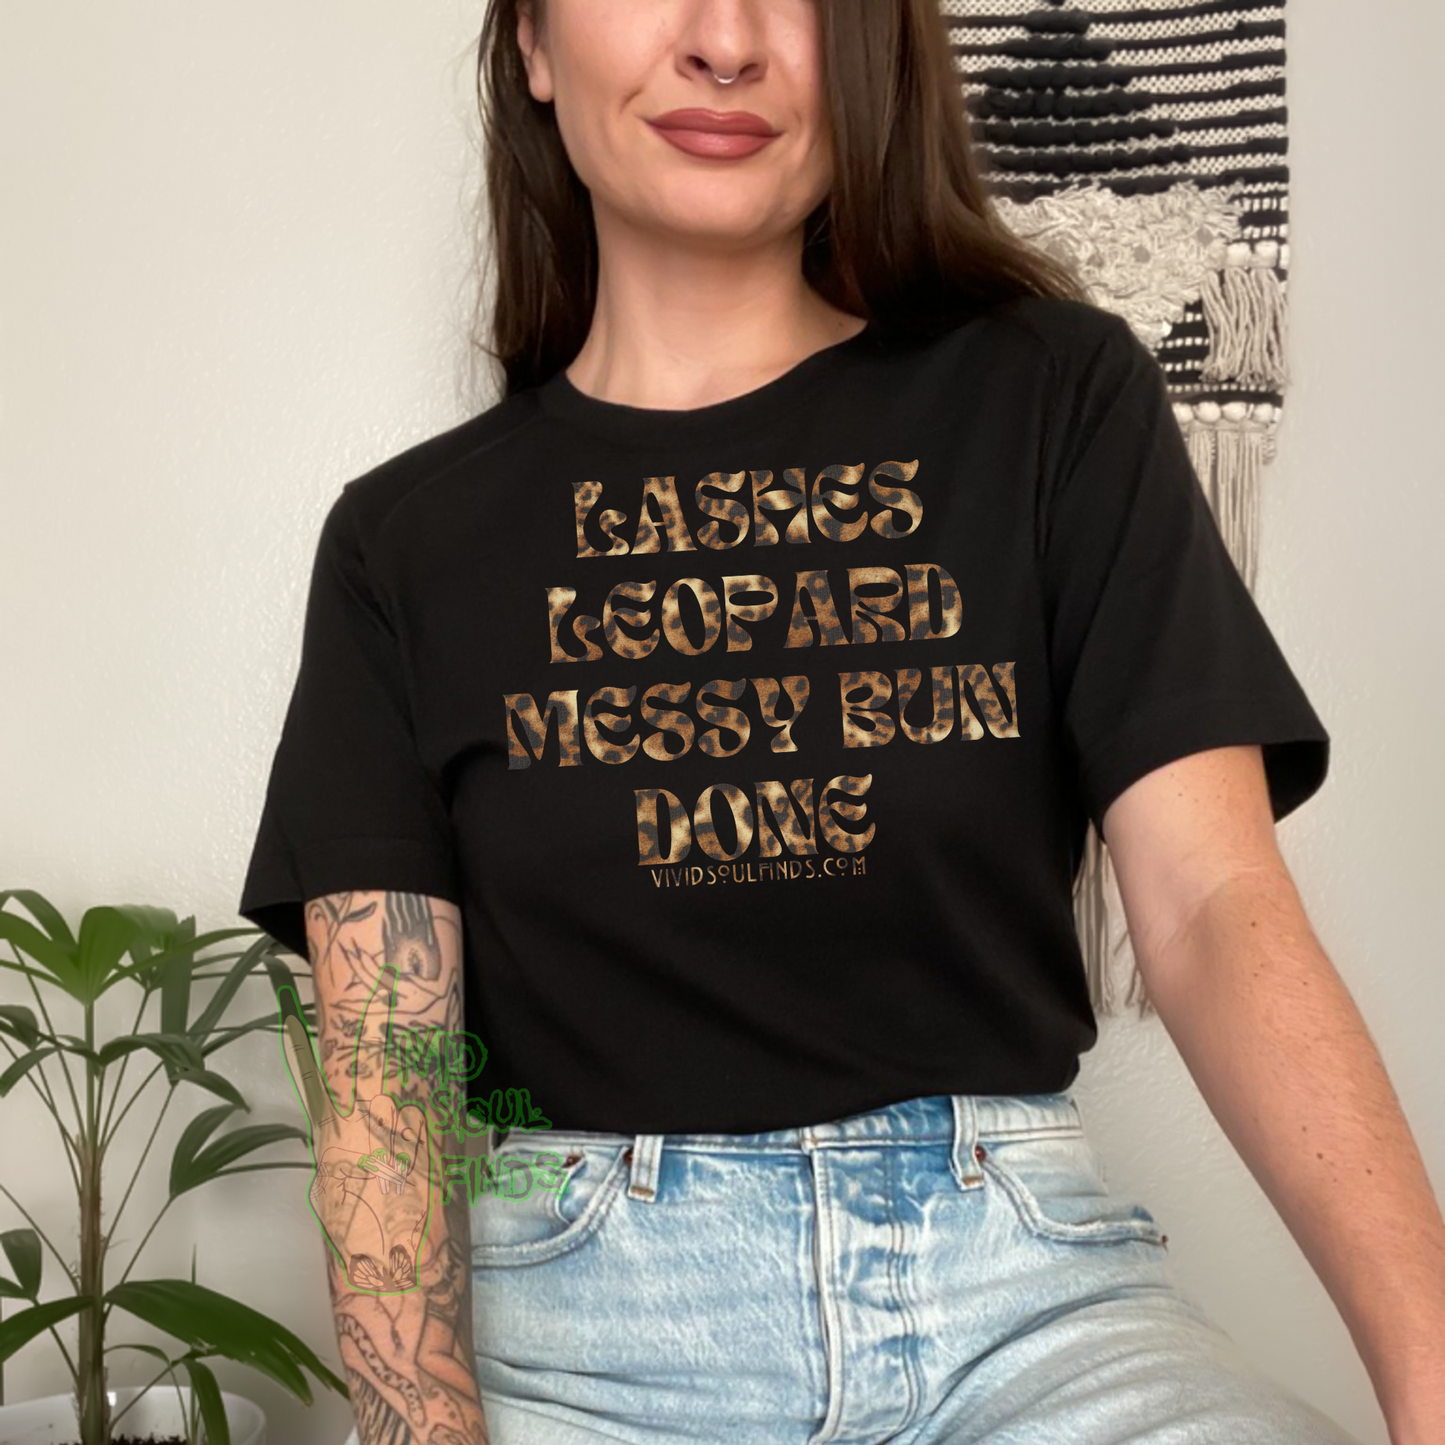 Lashes Leopard Messy Bun EXCLUSIVE VSF T-shirt